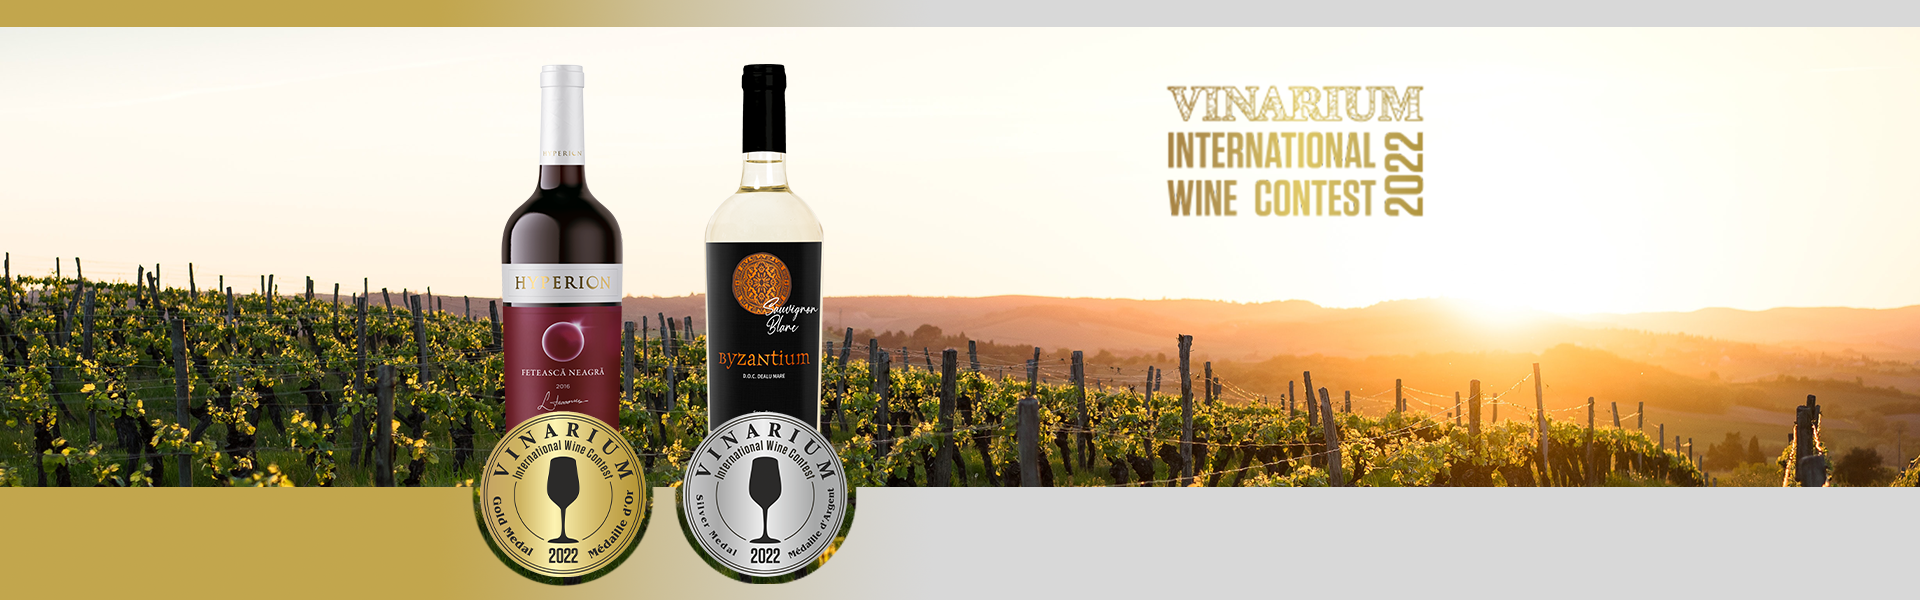 Two of our wines, awarded at VINARIUM International Wine Contest 2022